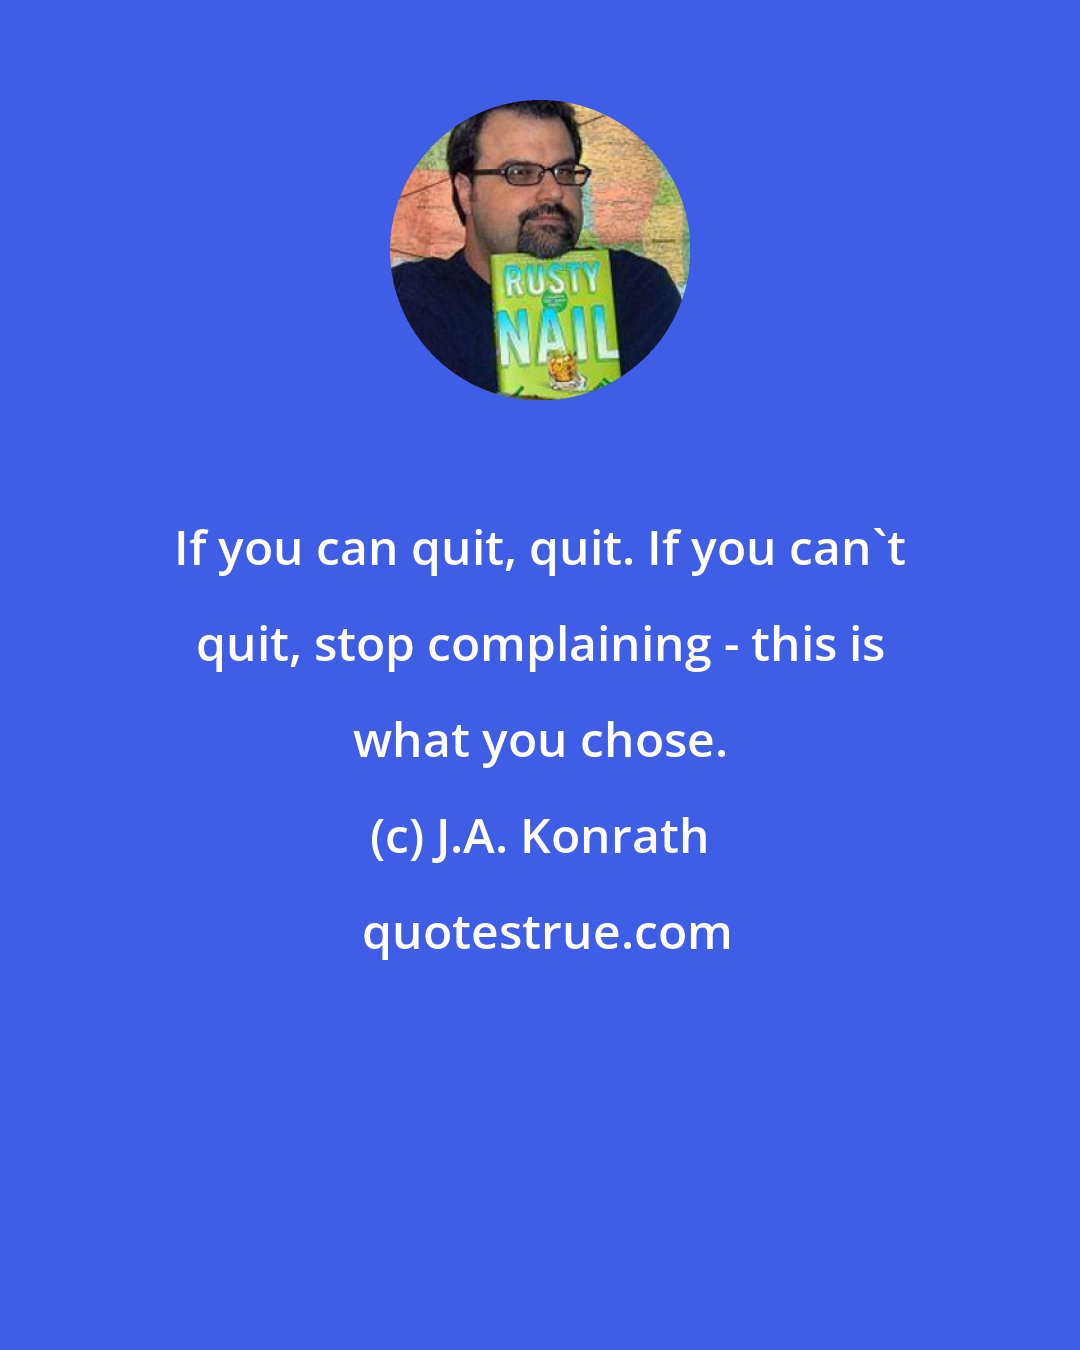 J.A. Konrath: If you can quit, quit. If you can't quit, stop complaining - this is what you chose.